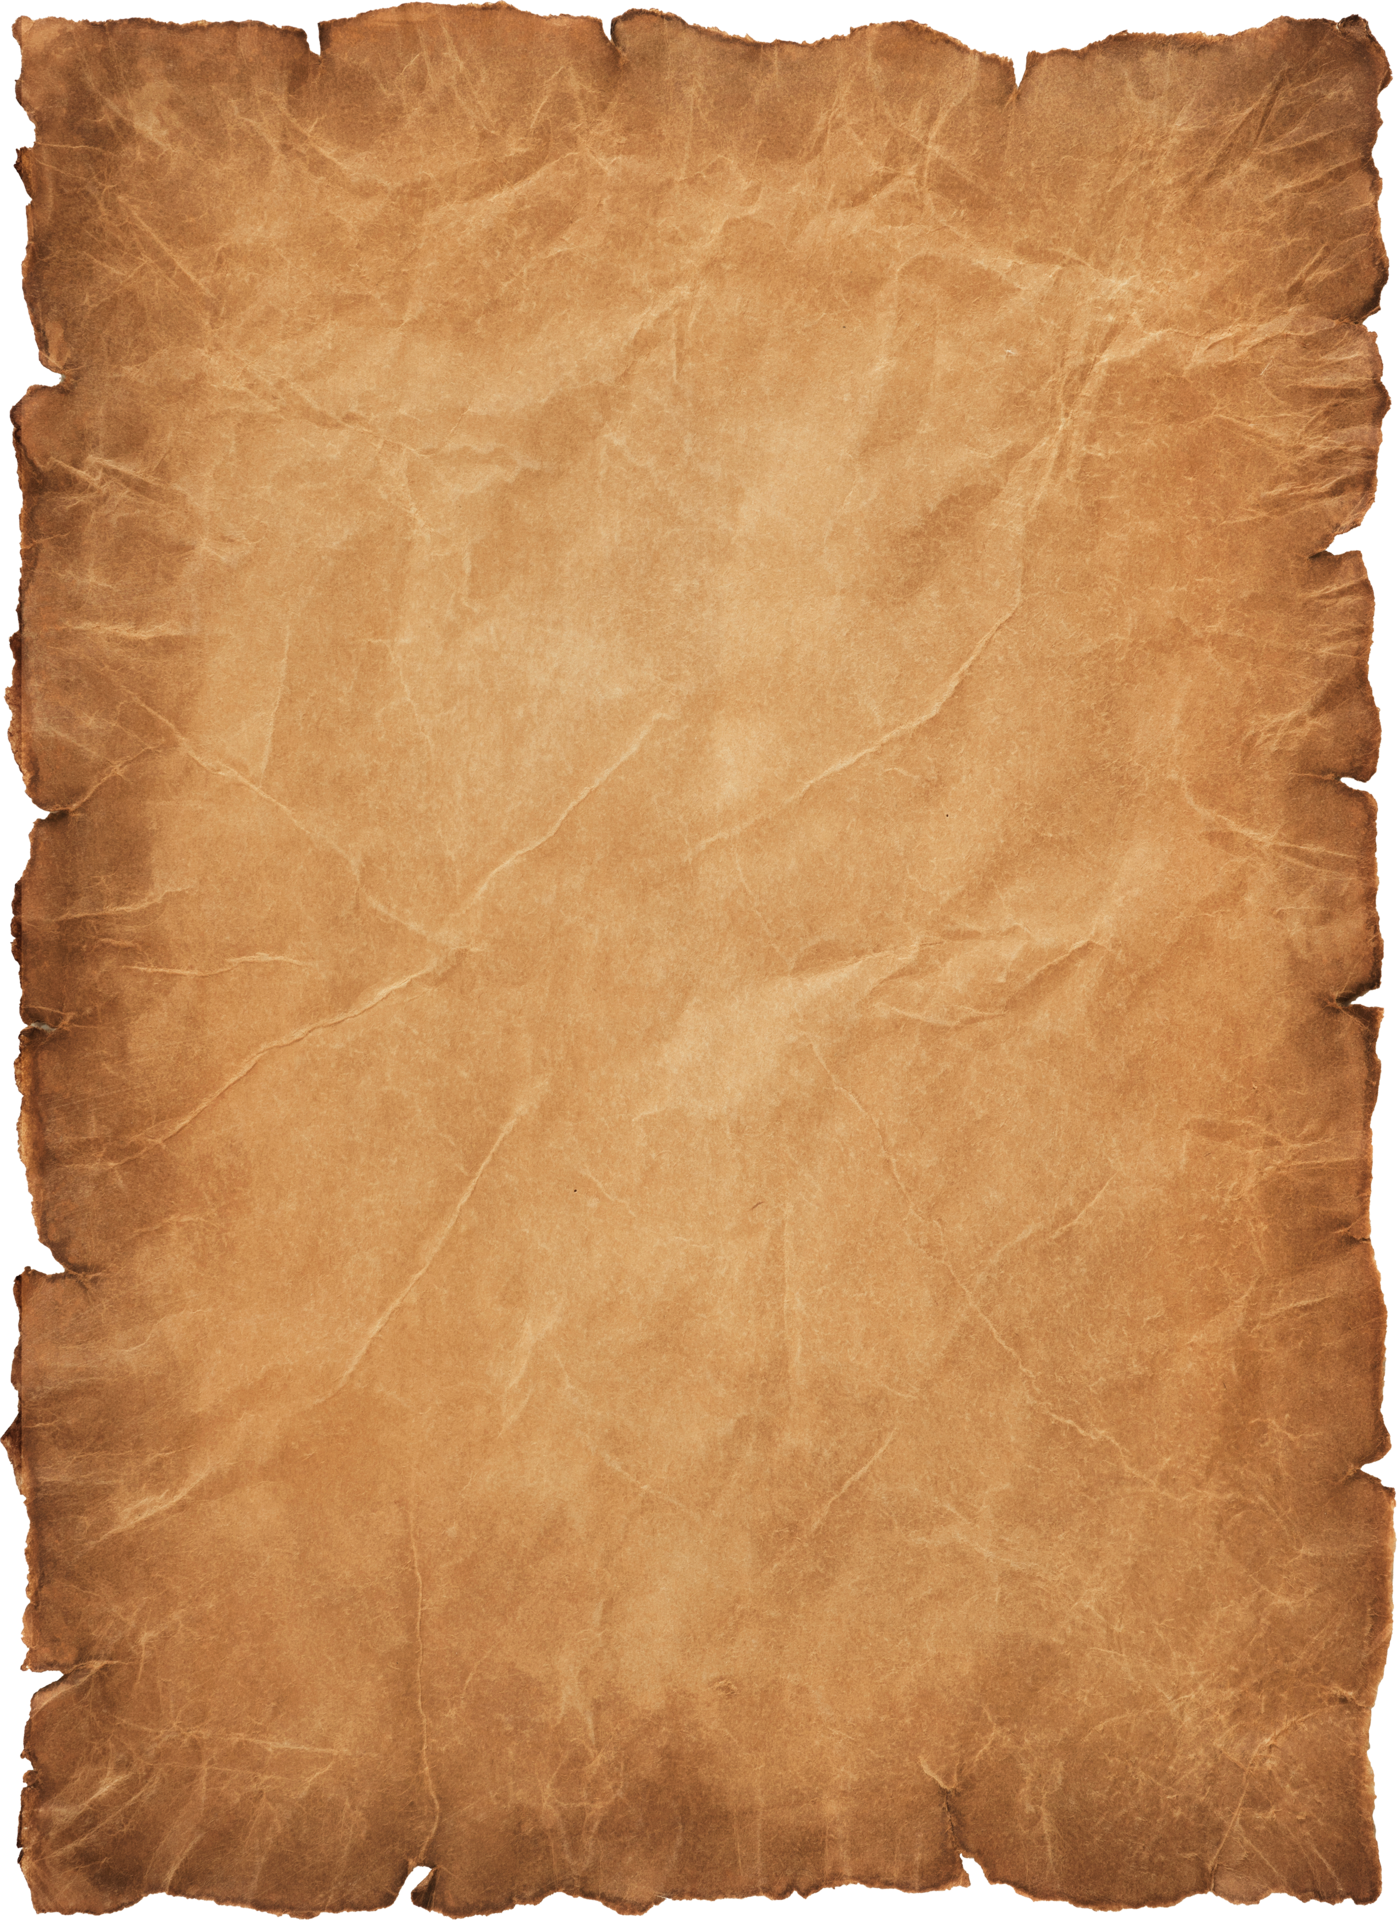 https://static.vecteezy.com/system/resources/previews/012/981/799/original/old-parchment-paper-sheet-vintage-aged-or-texture-background-png.png